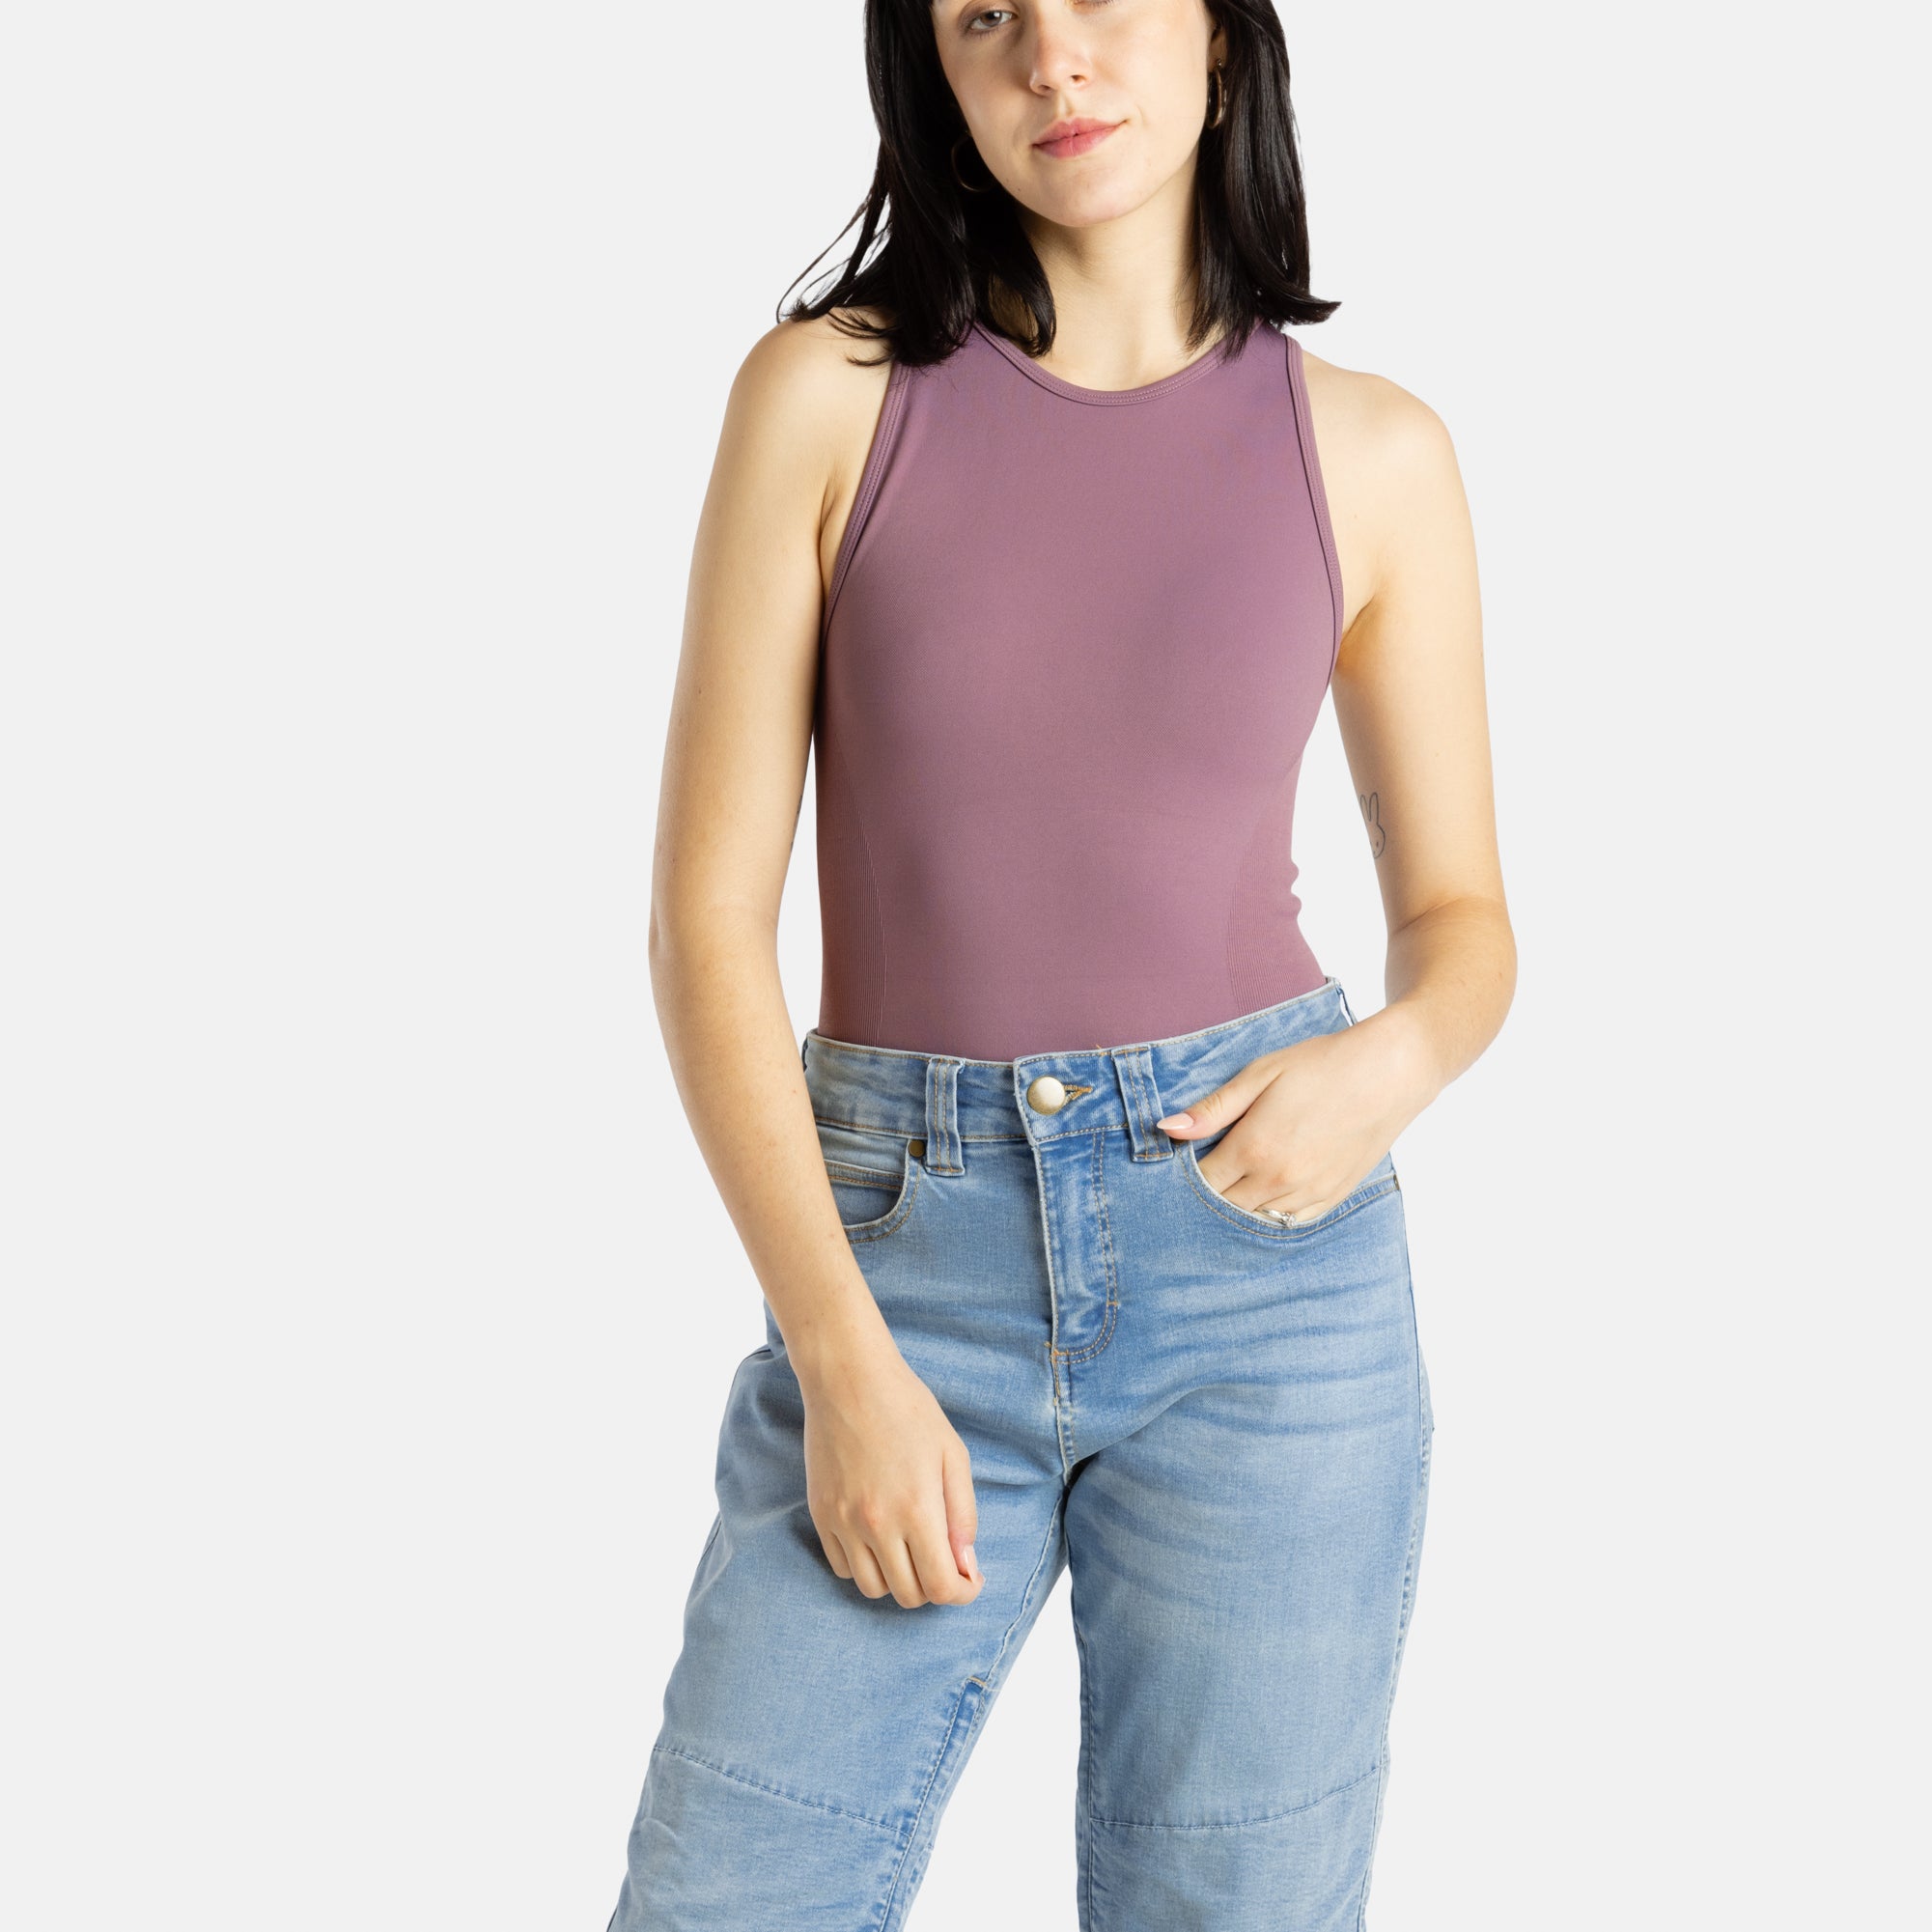 A white woman with long black hair and hoop earrings wears a mauve tank top and denim jeans.